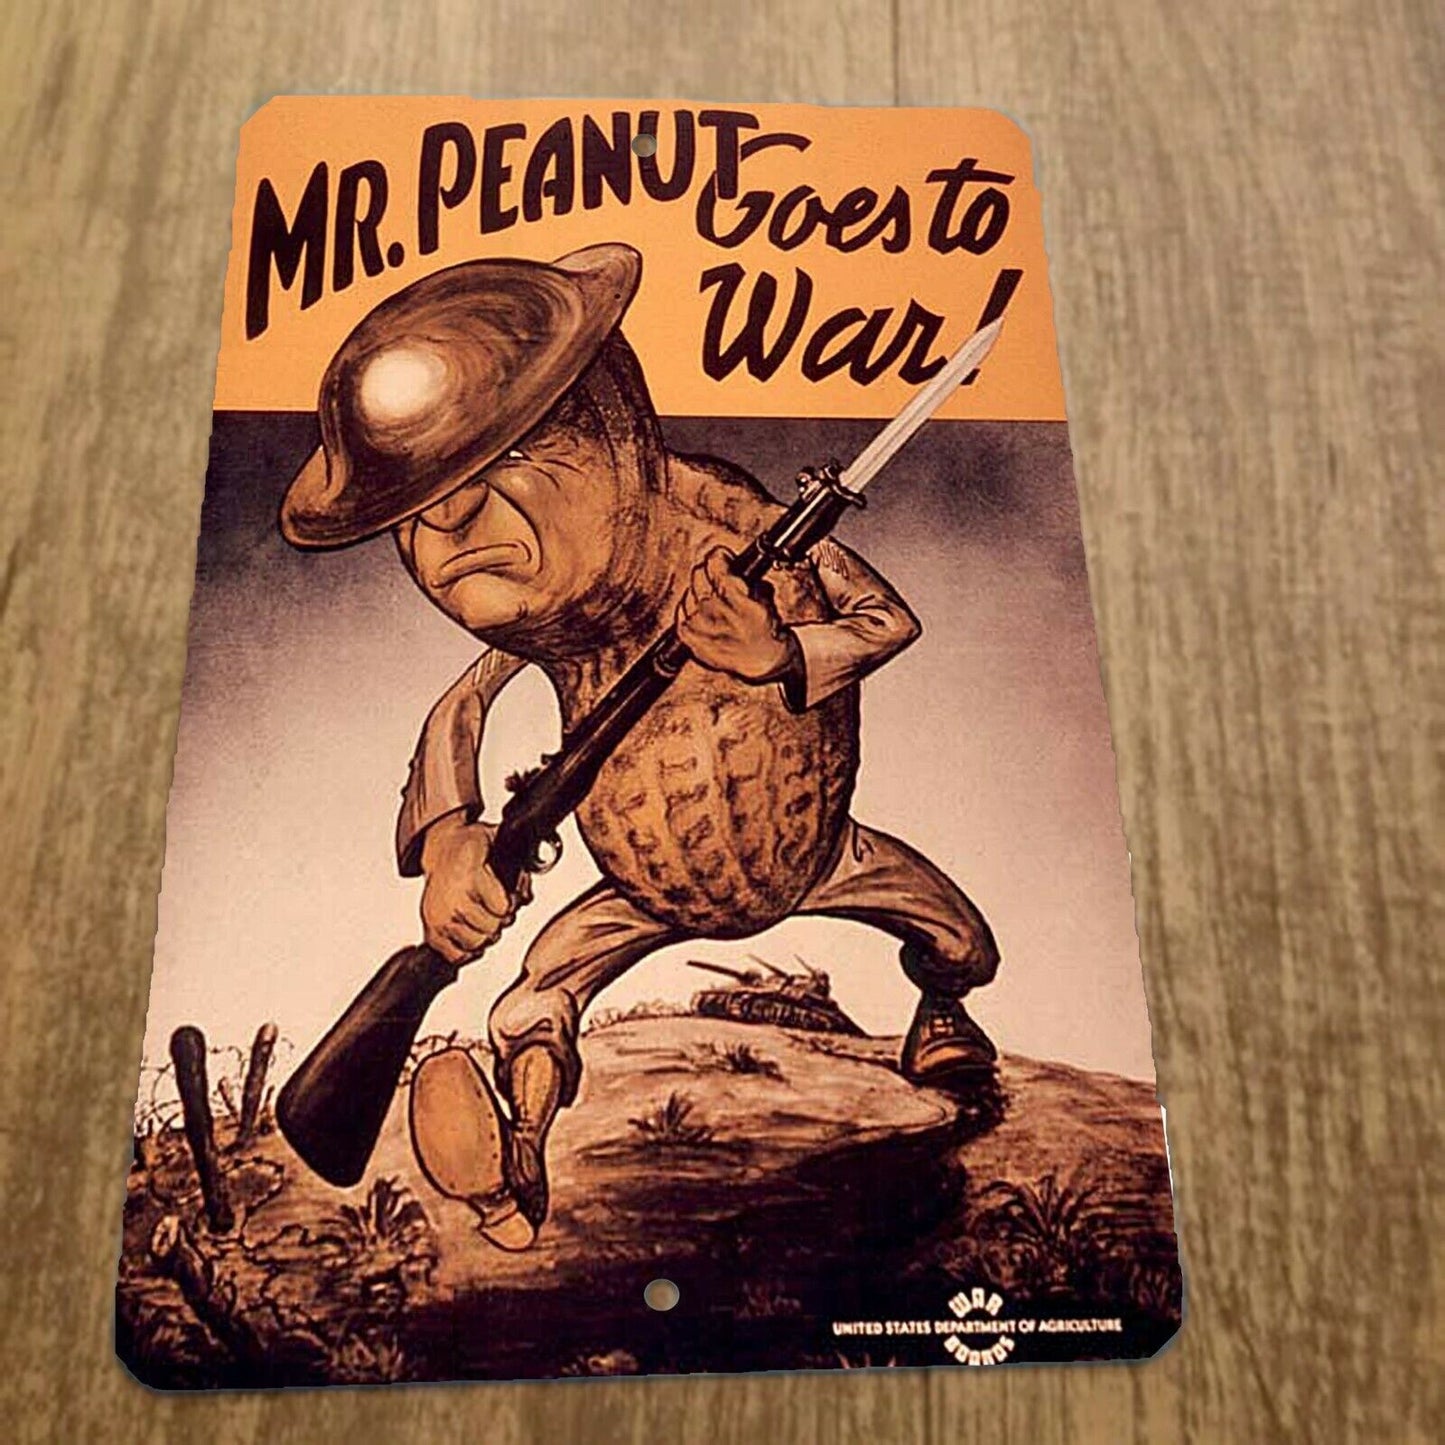 Mr Peanut goes to War 8x12 Metal Wall Sign Misc Poster Military